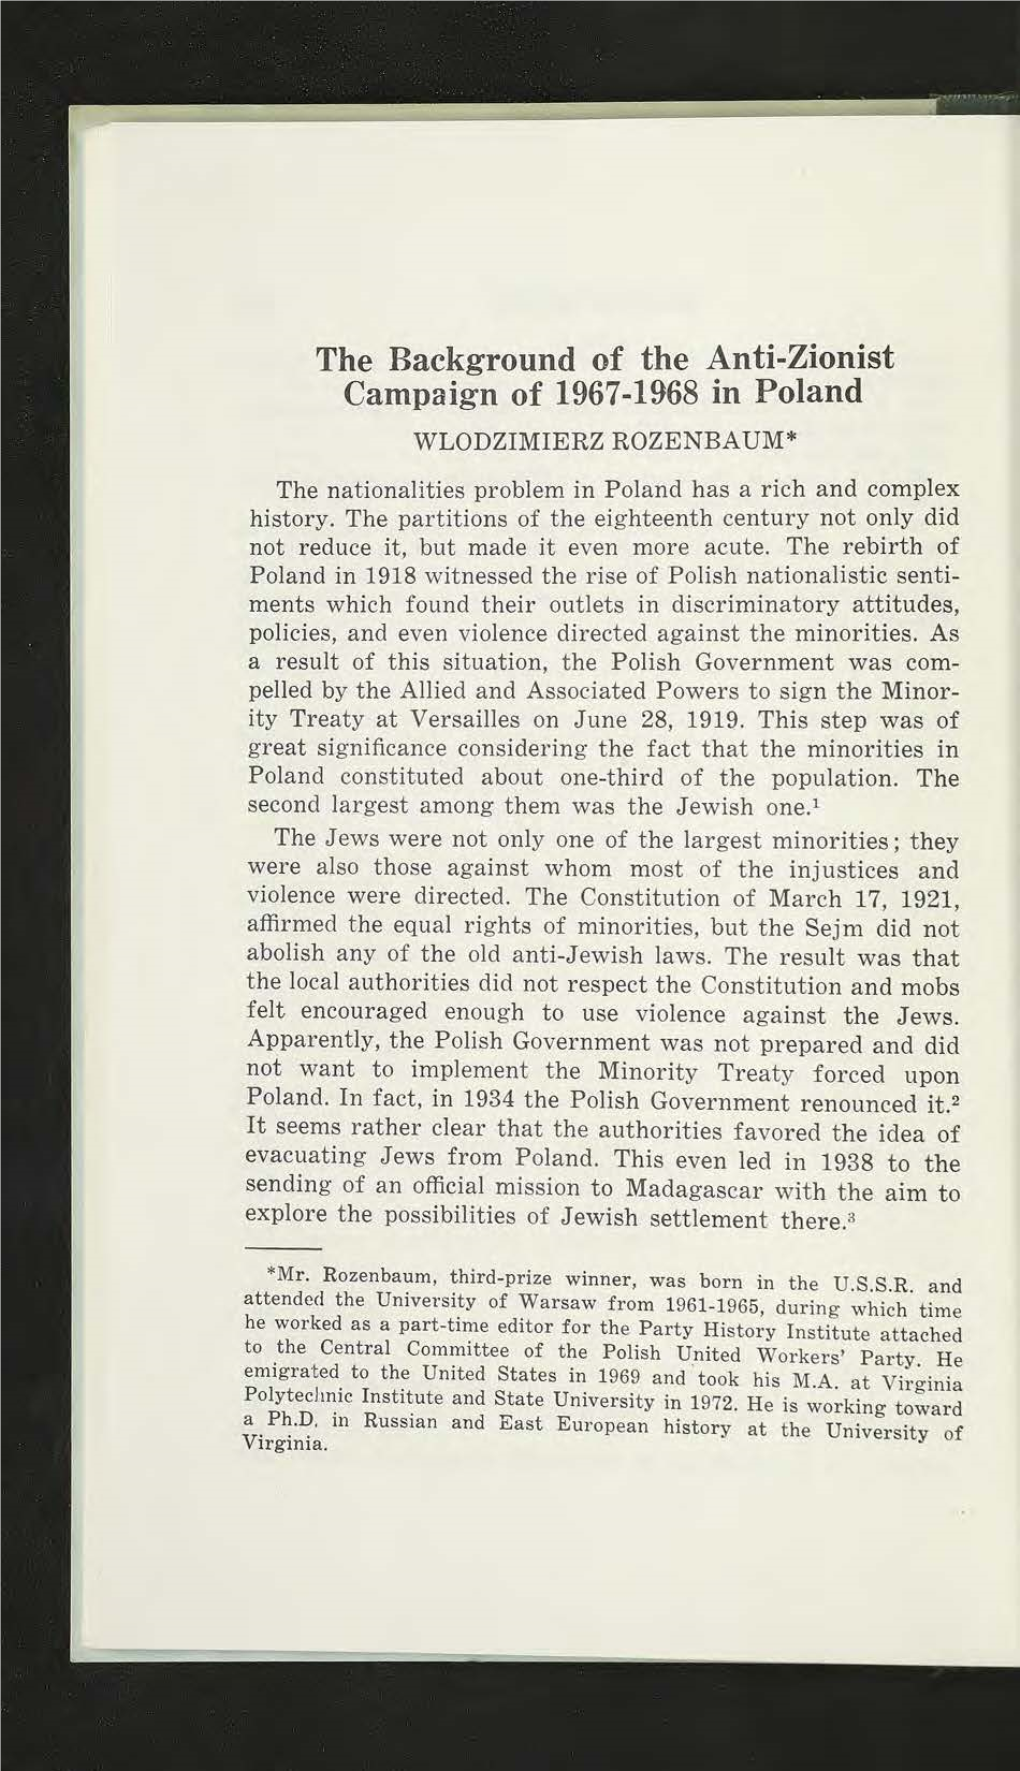 The Background of the Anti-Zionist Campaign of 1967-1968 in Poland WLODZIMIERZ ROZENBAUM* the Nationalities Problem in Poland Has a Rich and Complex History